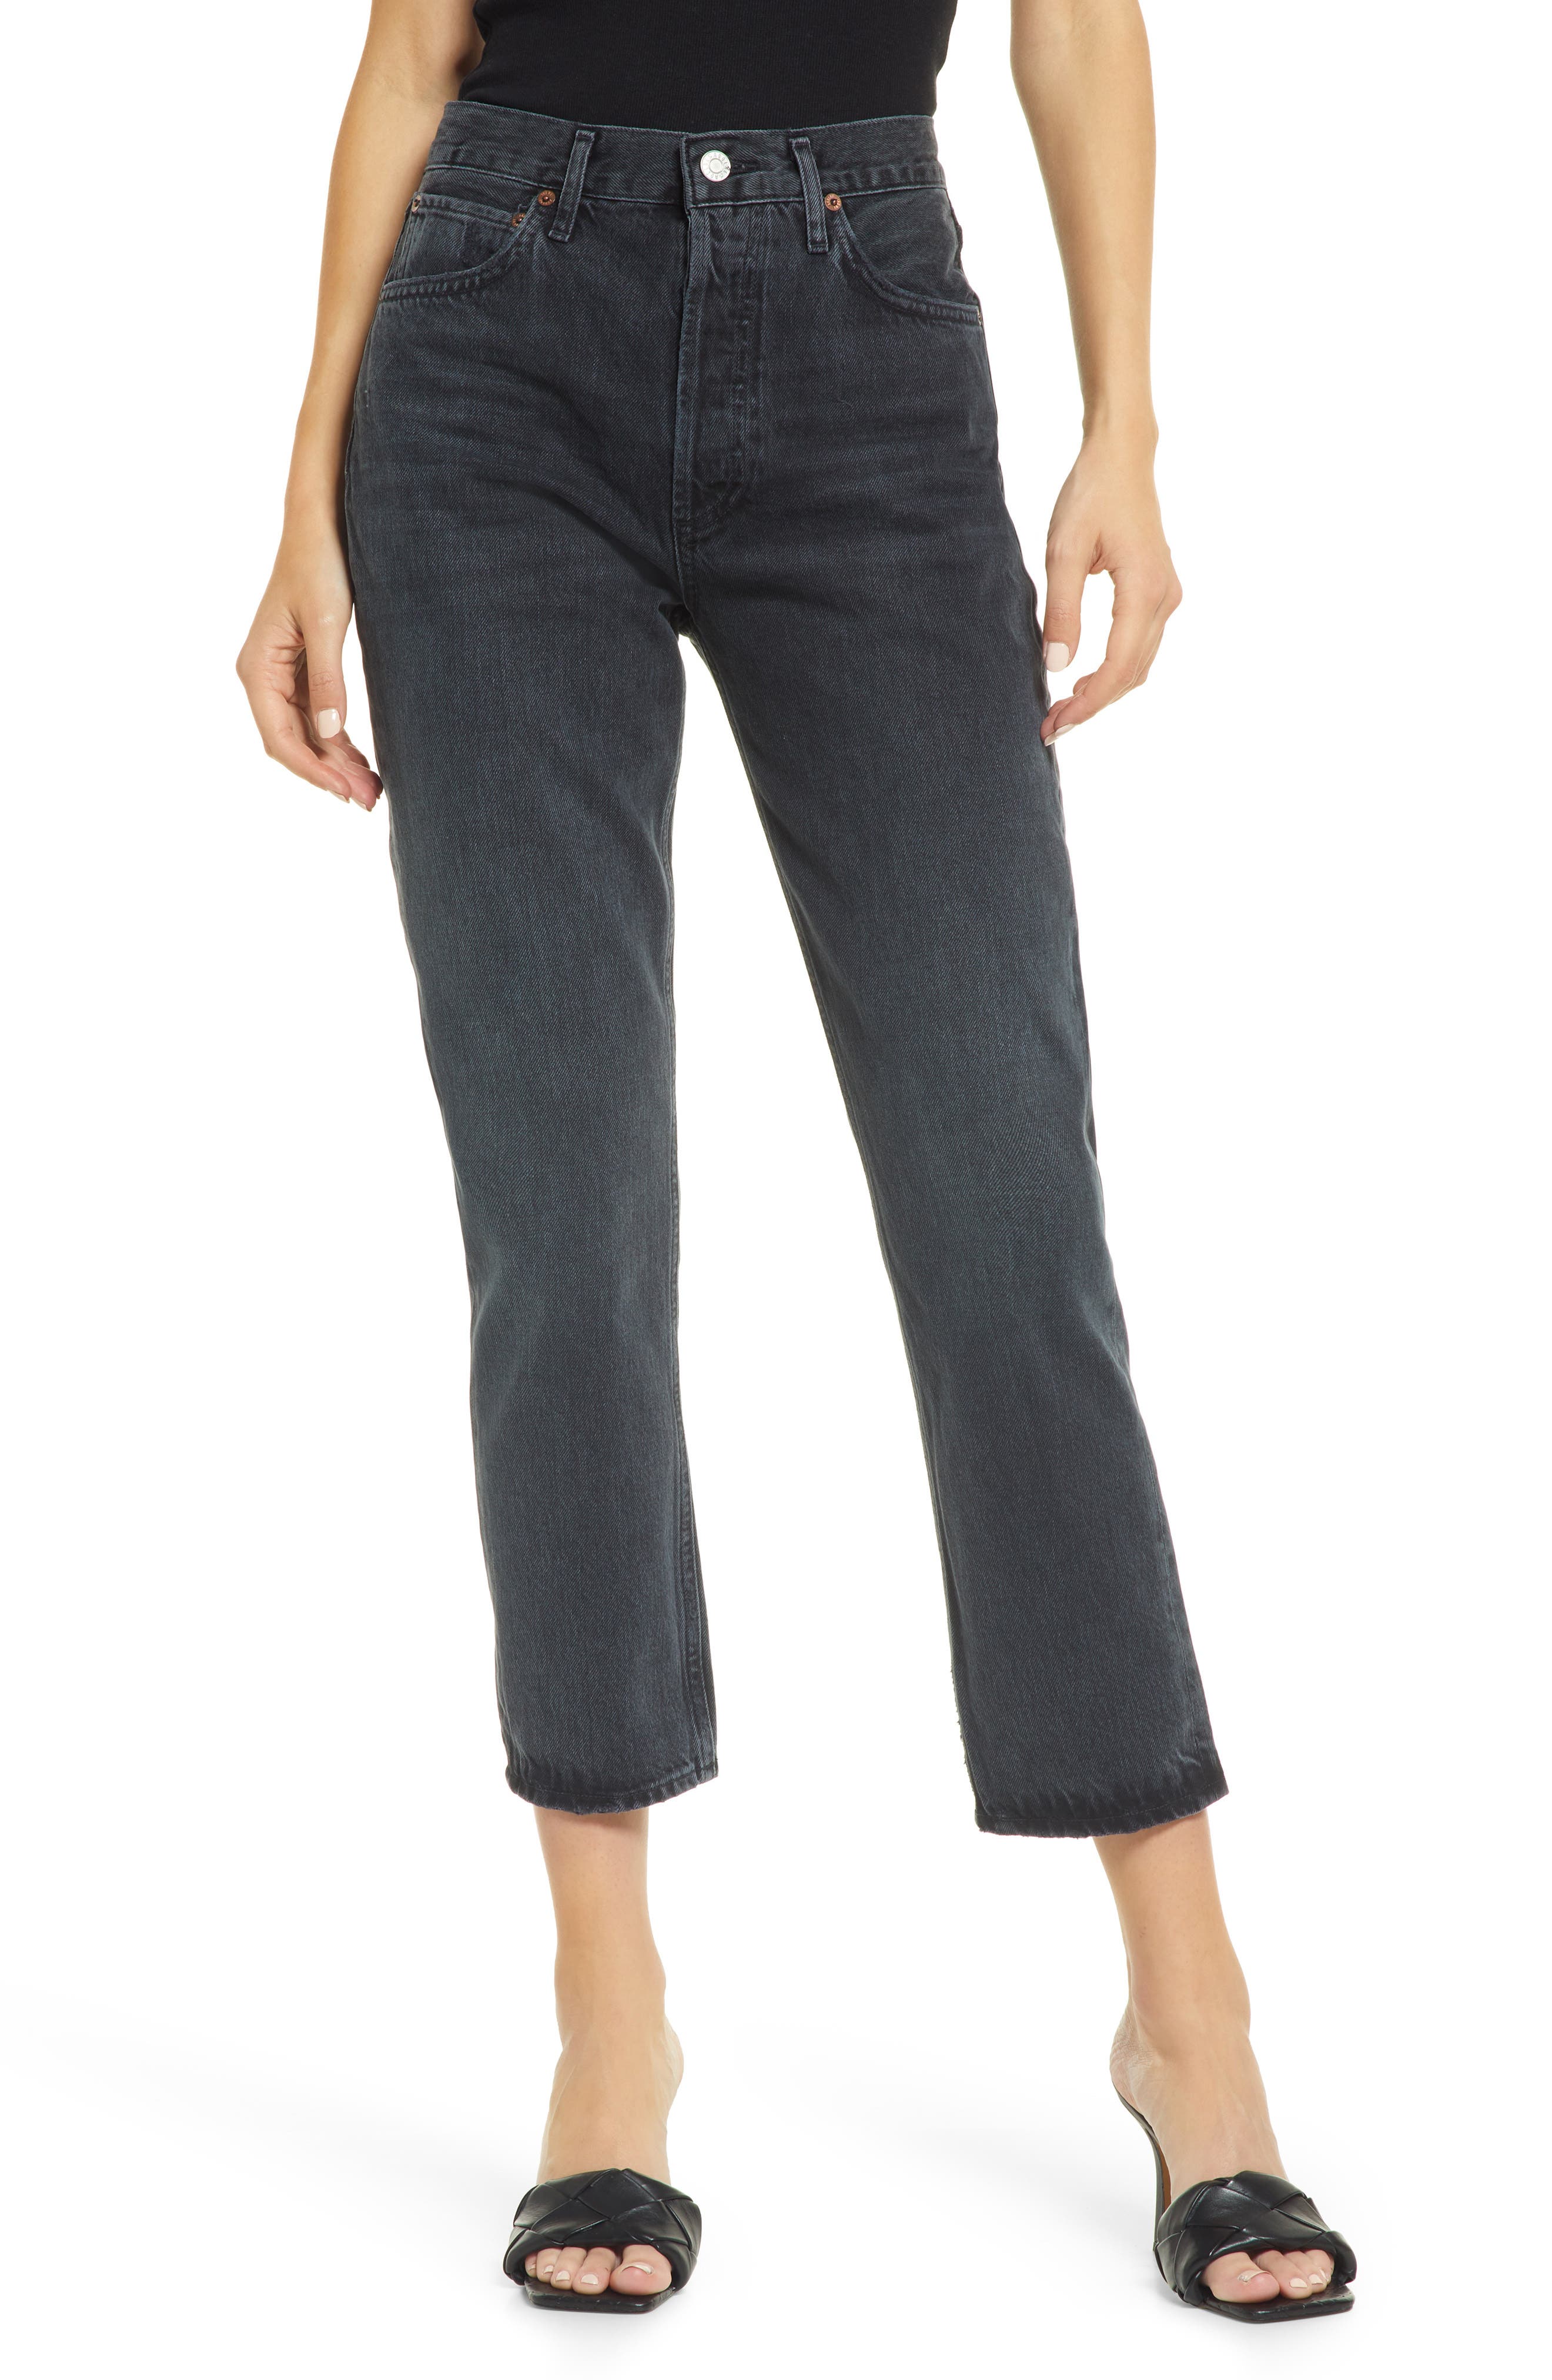 AGOLDE Riley High Waist Crop Straight Leg Jeans in Edit Black W/Damage at Nordstrom, Size 32